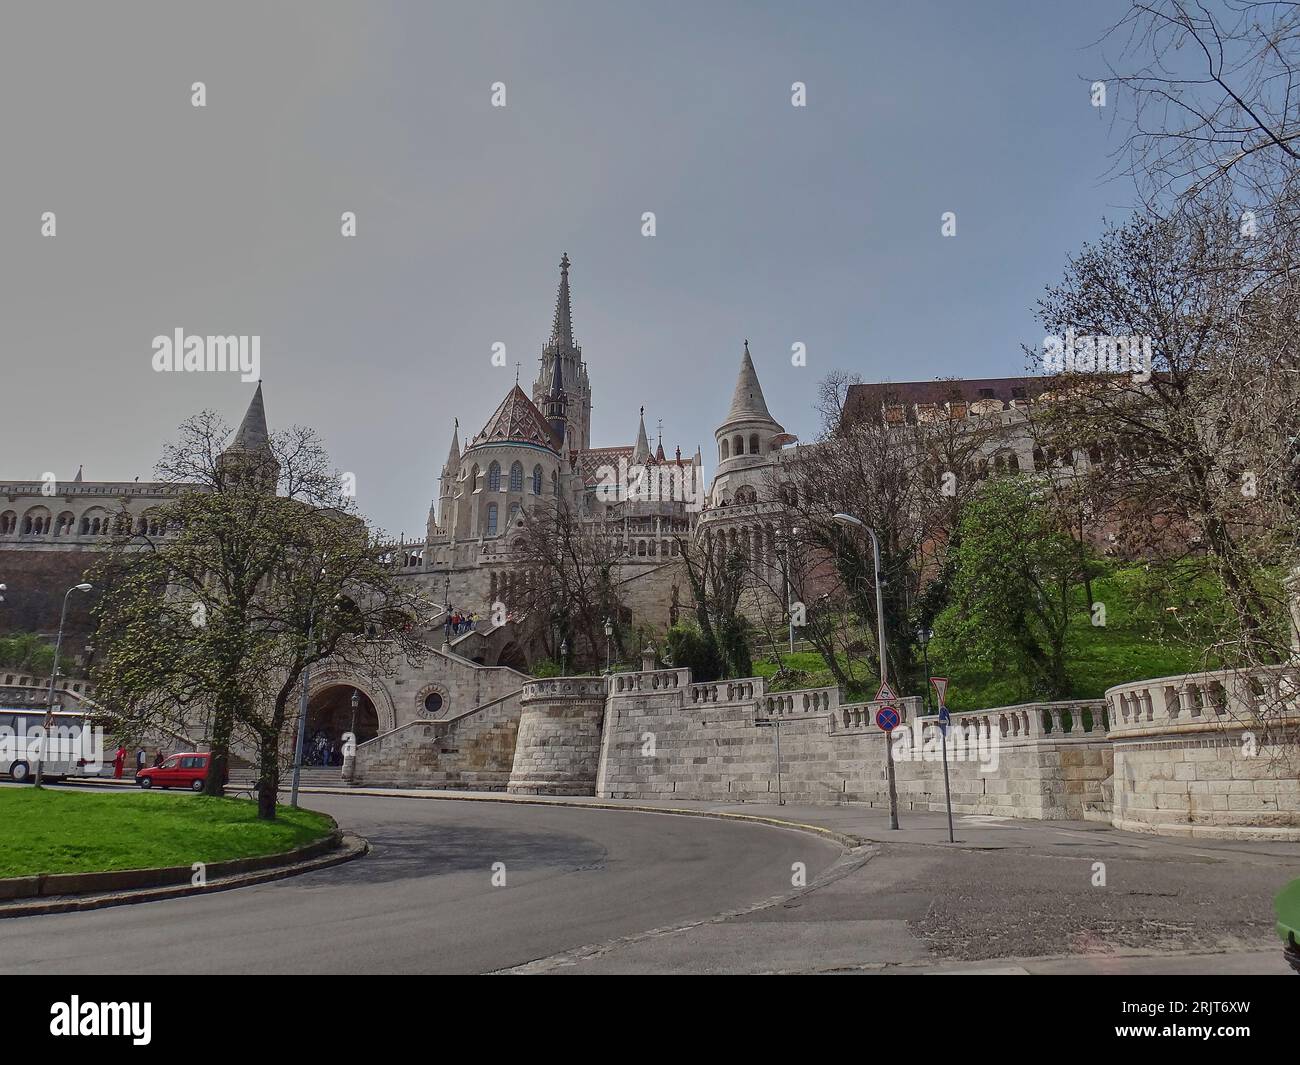 Budapest, Hungary - 03 04 2011: historical building in Budapest, the capital of Hungary. Stock Photo